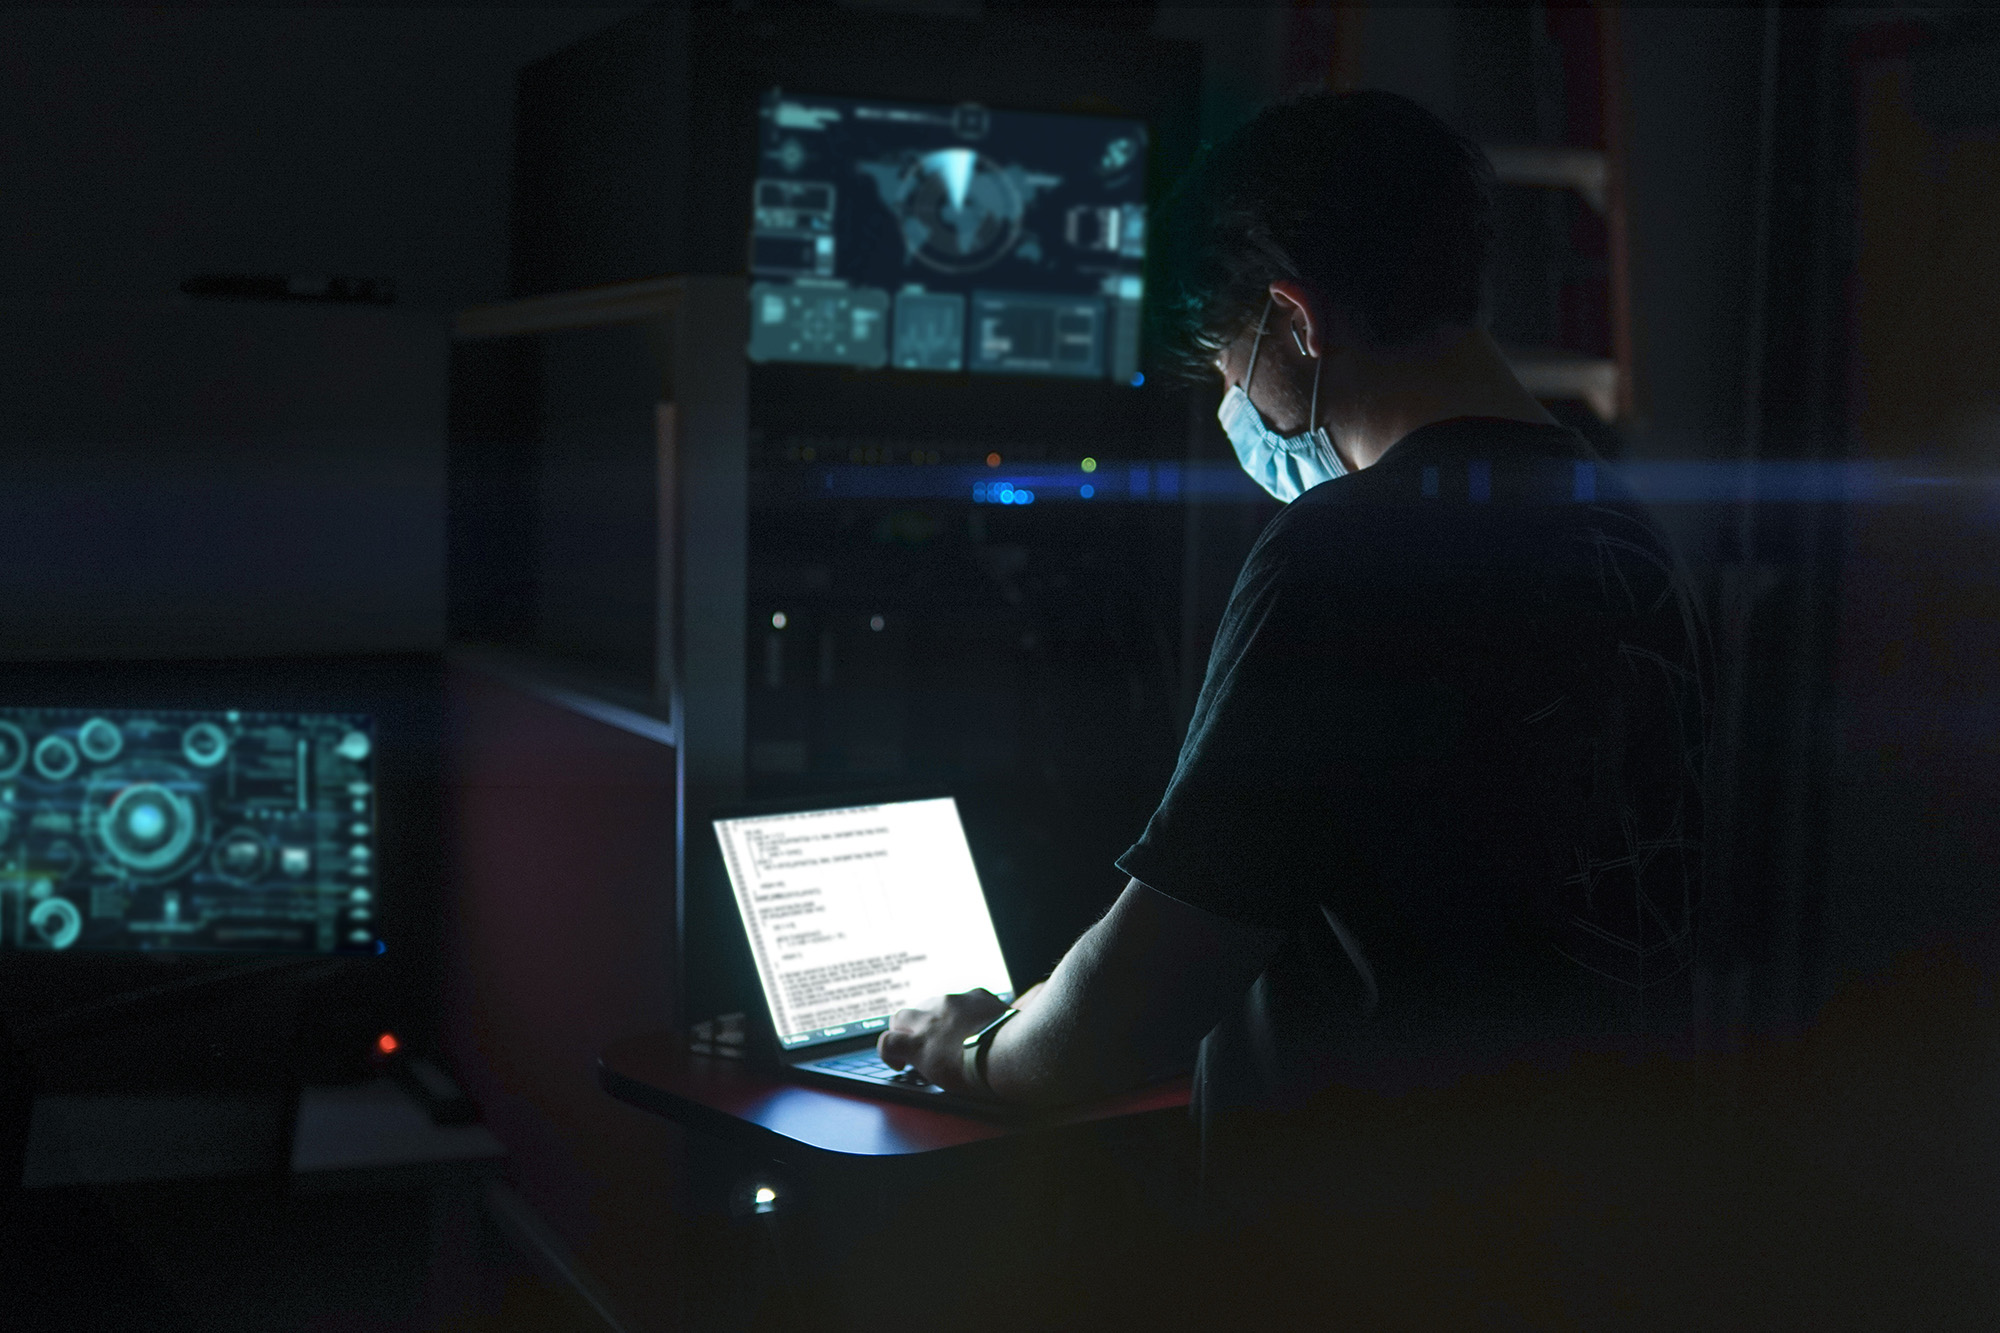 A person using a laptop computer in a dark room.